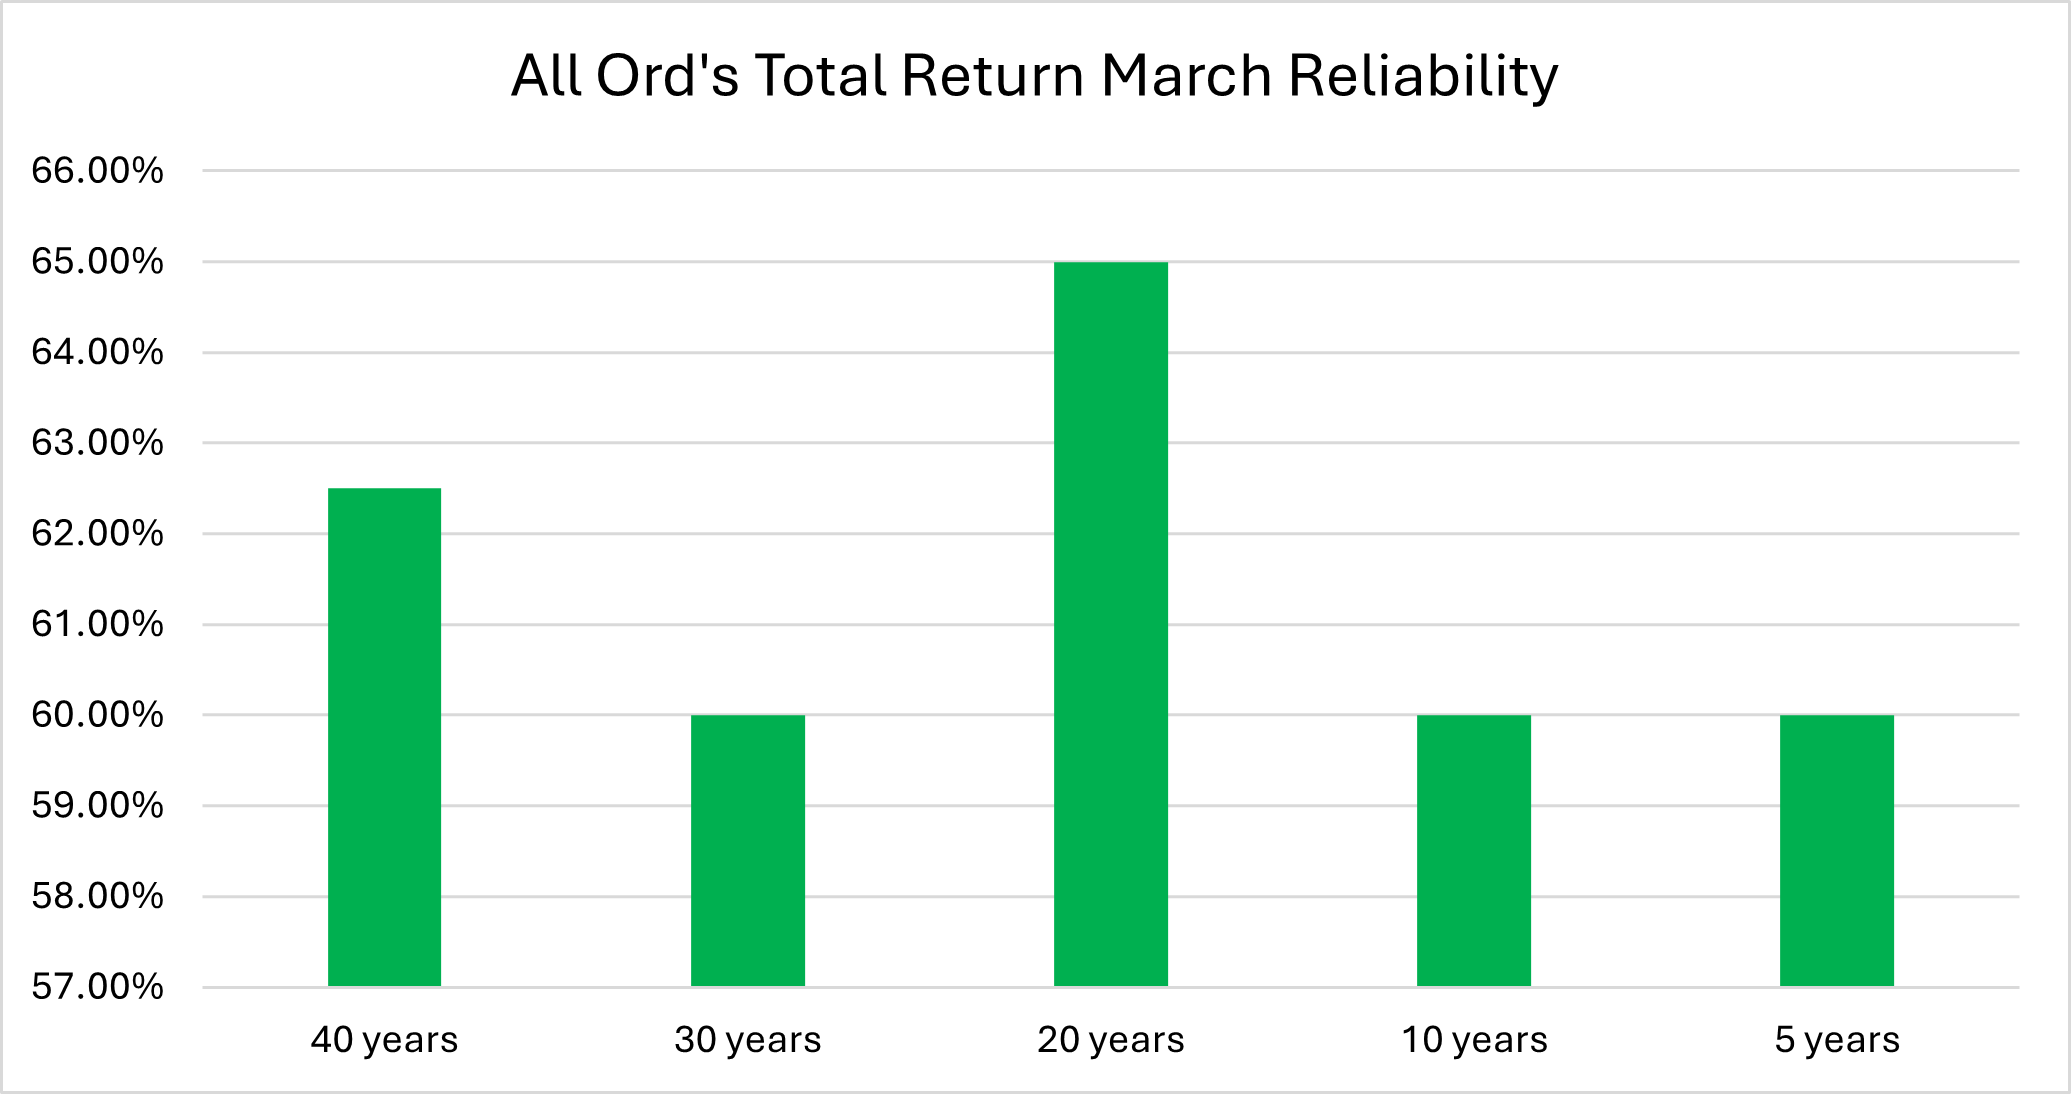 More often than not, March delivers a positive return